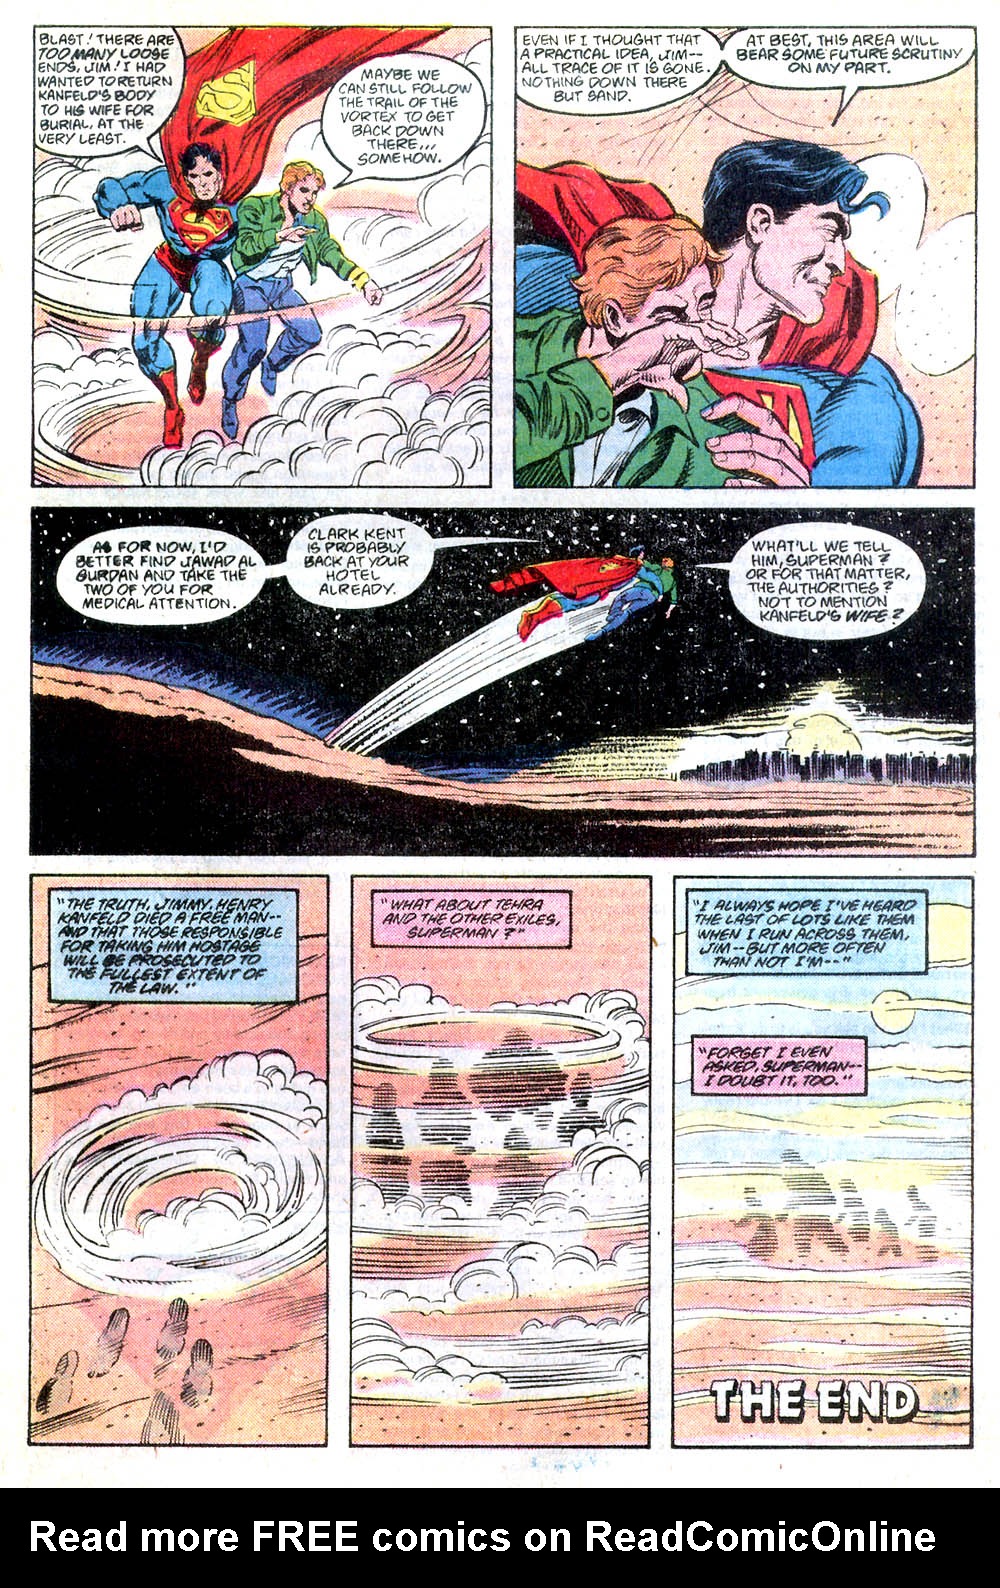 Adventures of Superman (1987) 443 Page 31